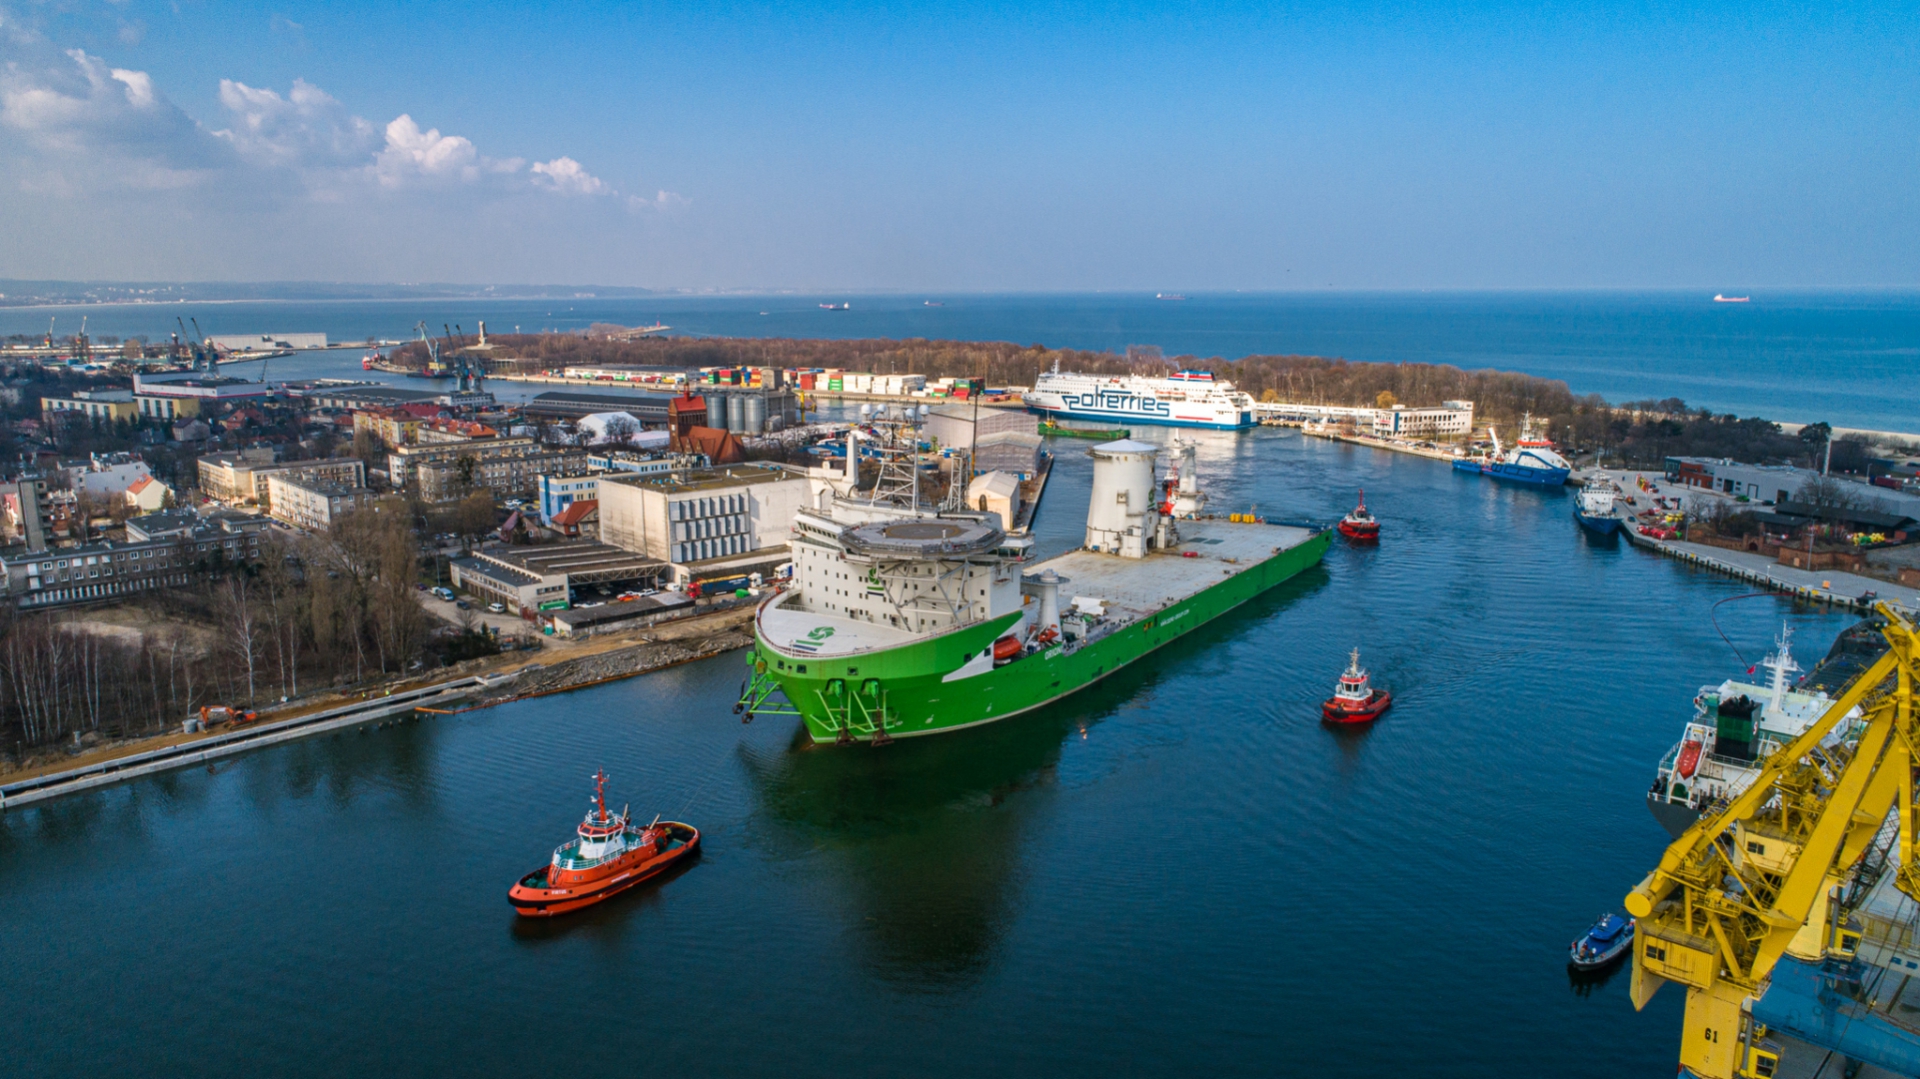 Orion I - offshore colossus entered the Port of Gdansk after accident involving one of the largest cranes in the world - MarinePoland.com